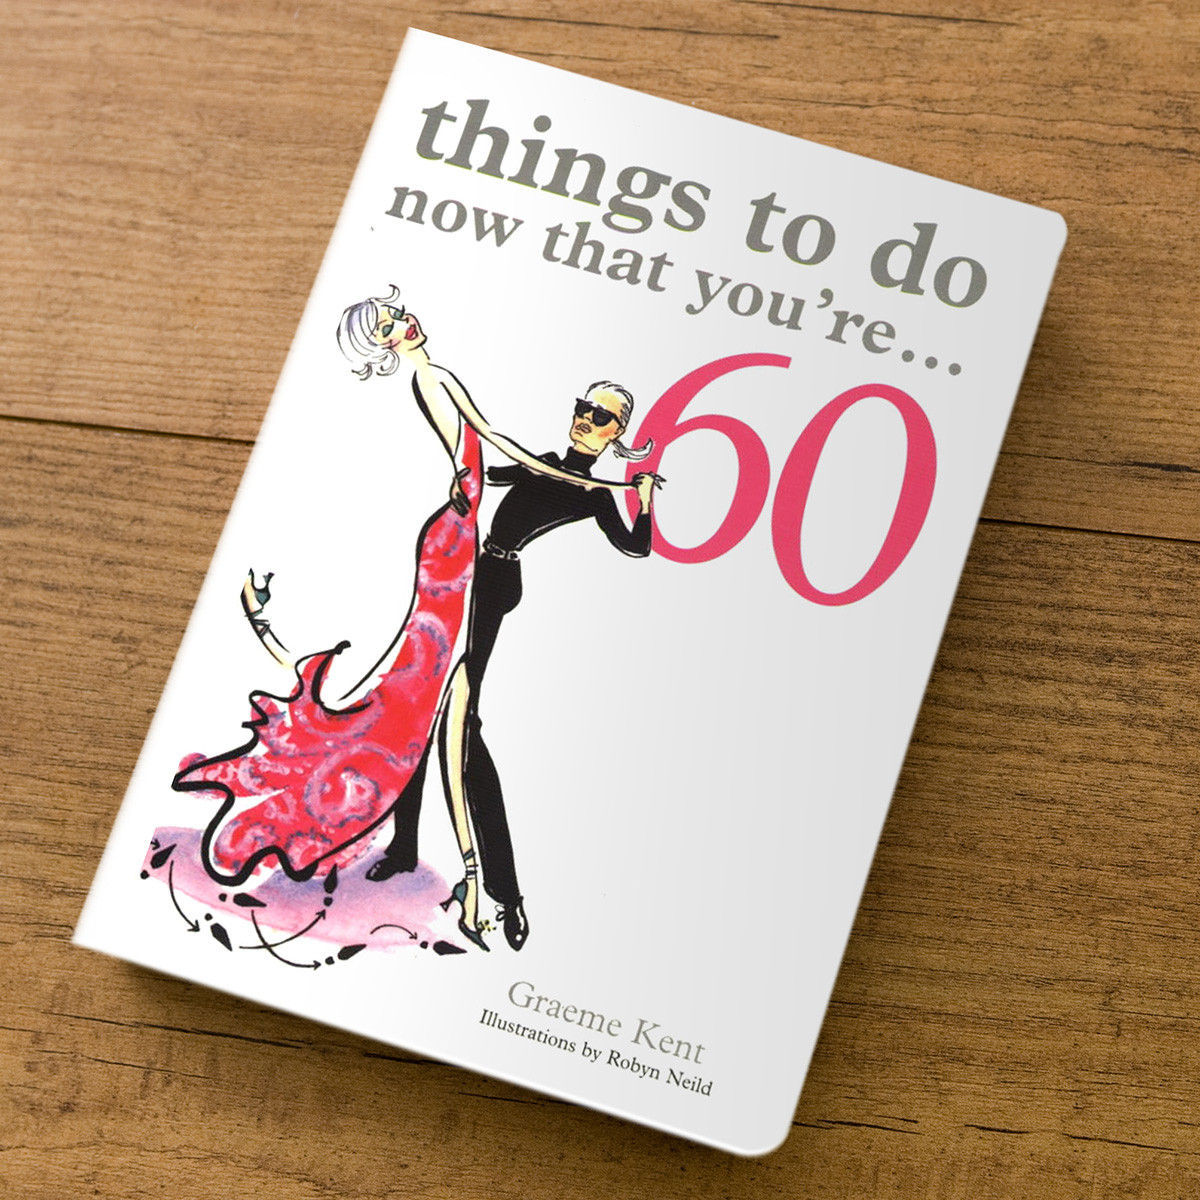 60th Birthday Gift Ideas For Her
 Things To Do Now That You re 60 Gift Book 60th